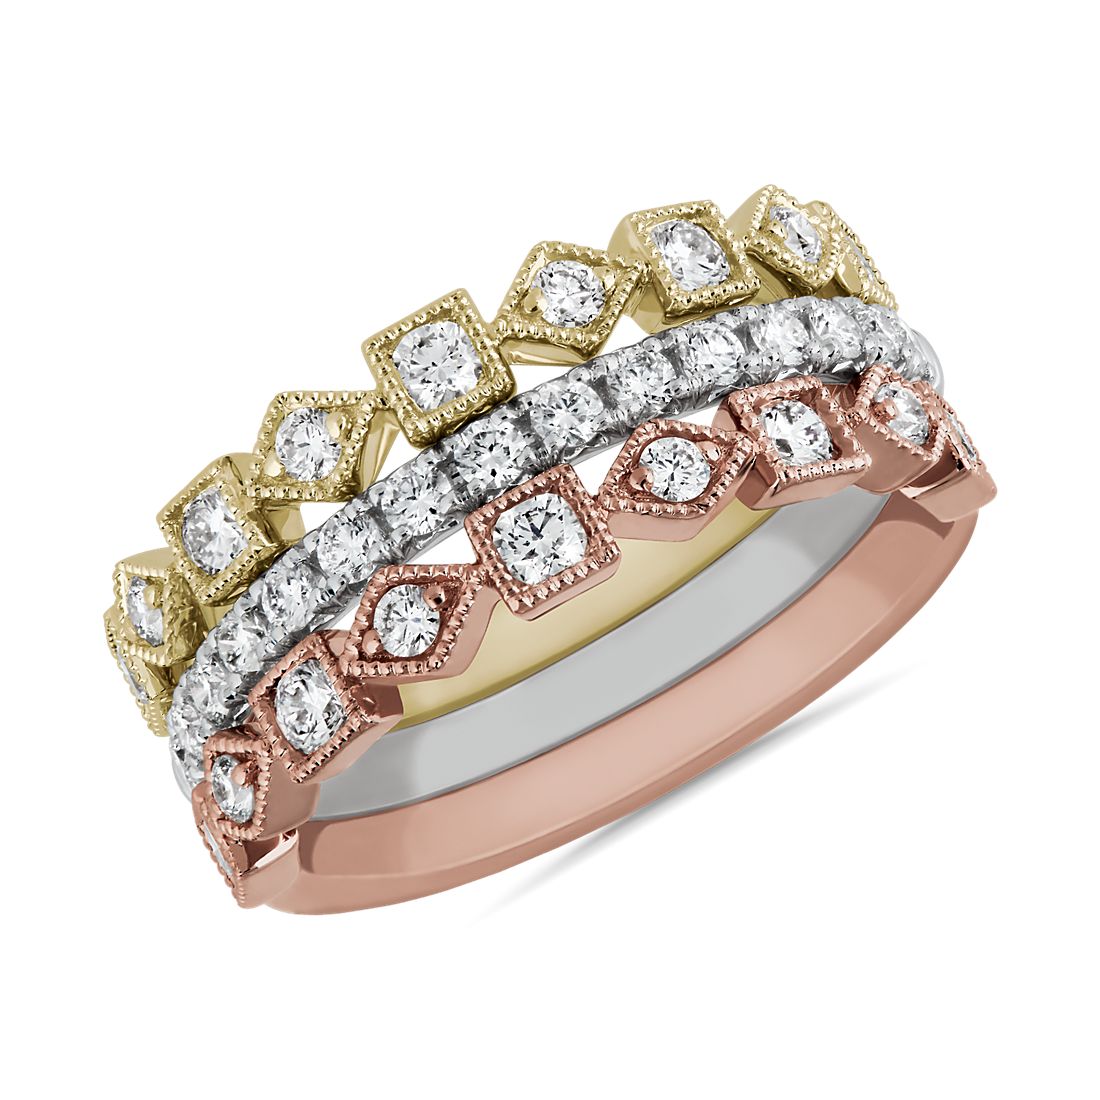 Milgrain Stacking Ring Set in 14k White, Yellow, and Rose Gold (¾ ct. tw.)